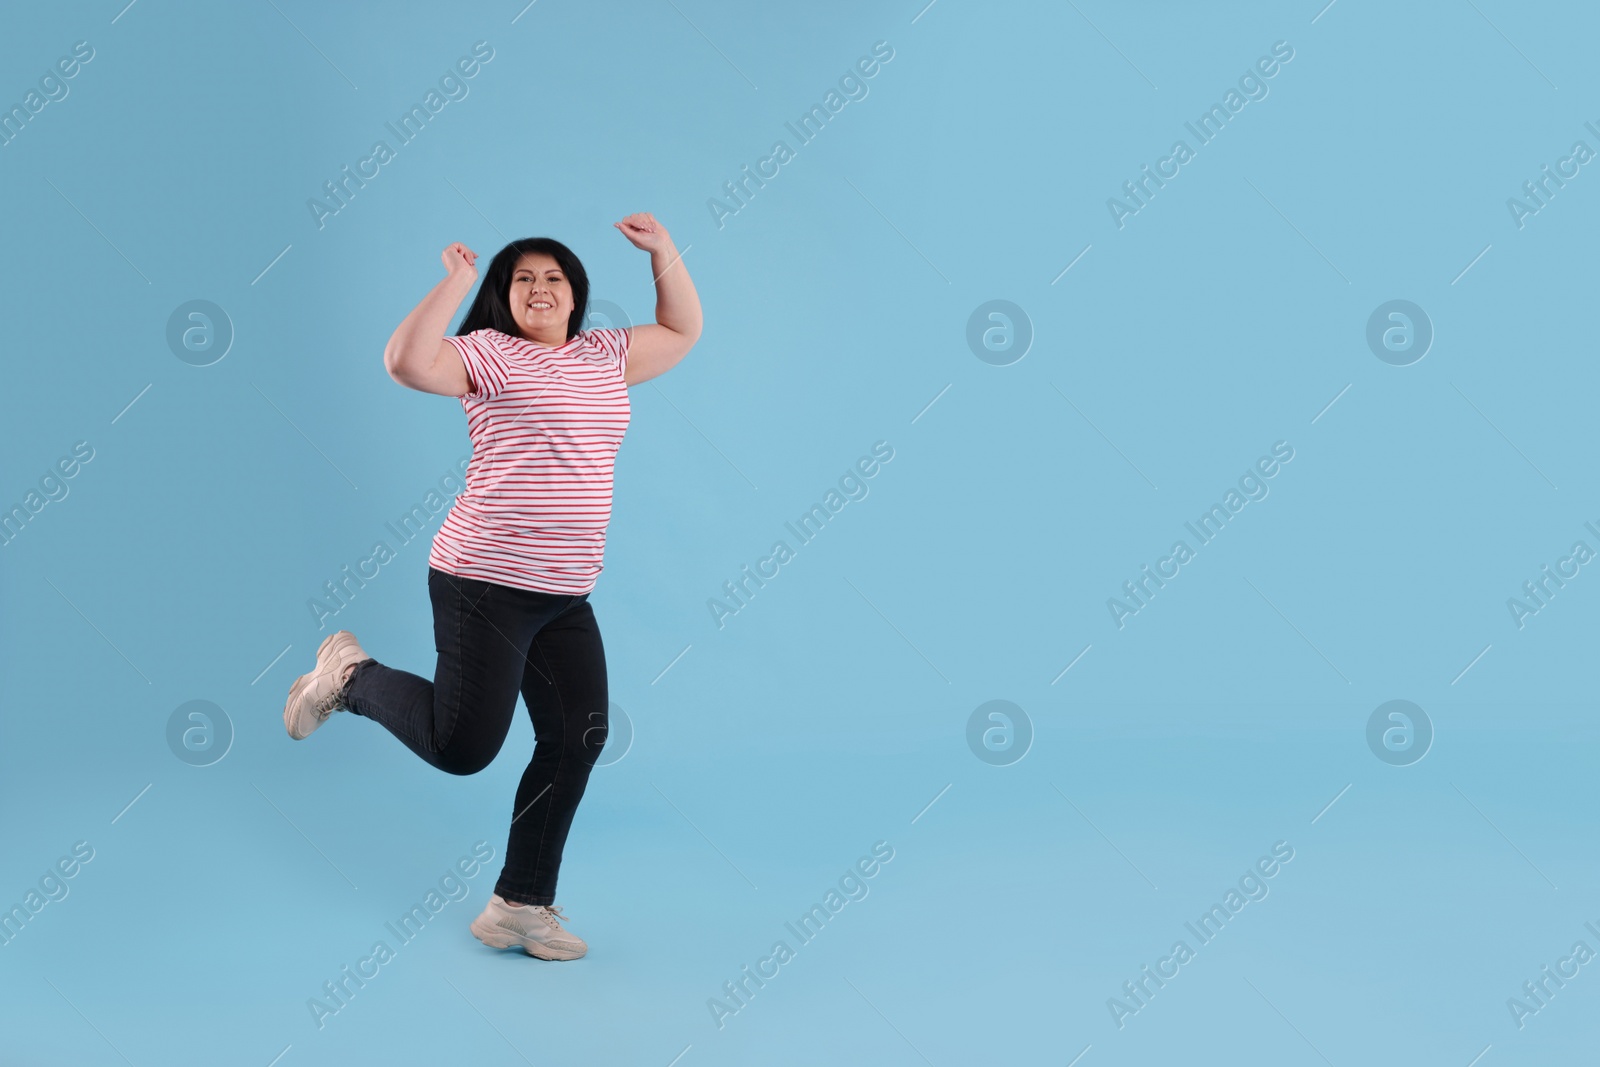 Photo of Beautiful overweight mature woman jumping on turquoise background. Space for text